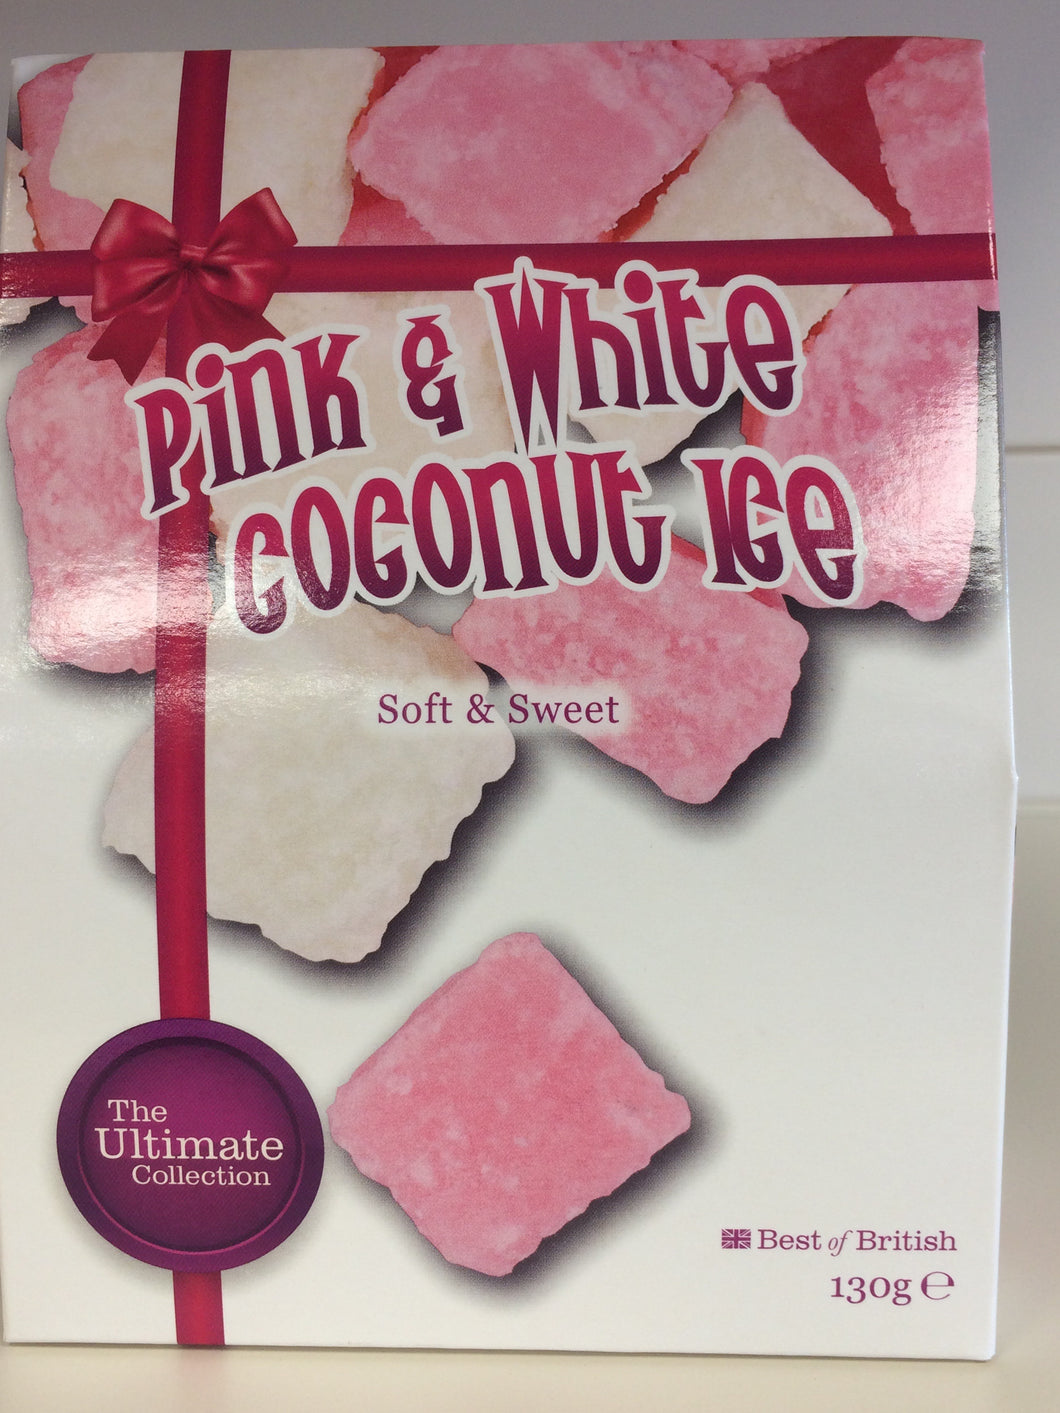 Ultimate Collection Coconut Ice Pink & White 130g